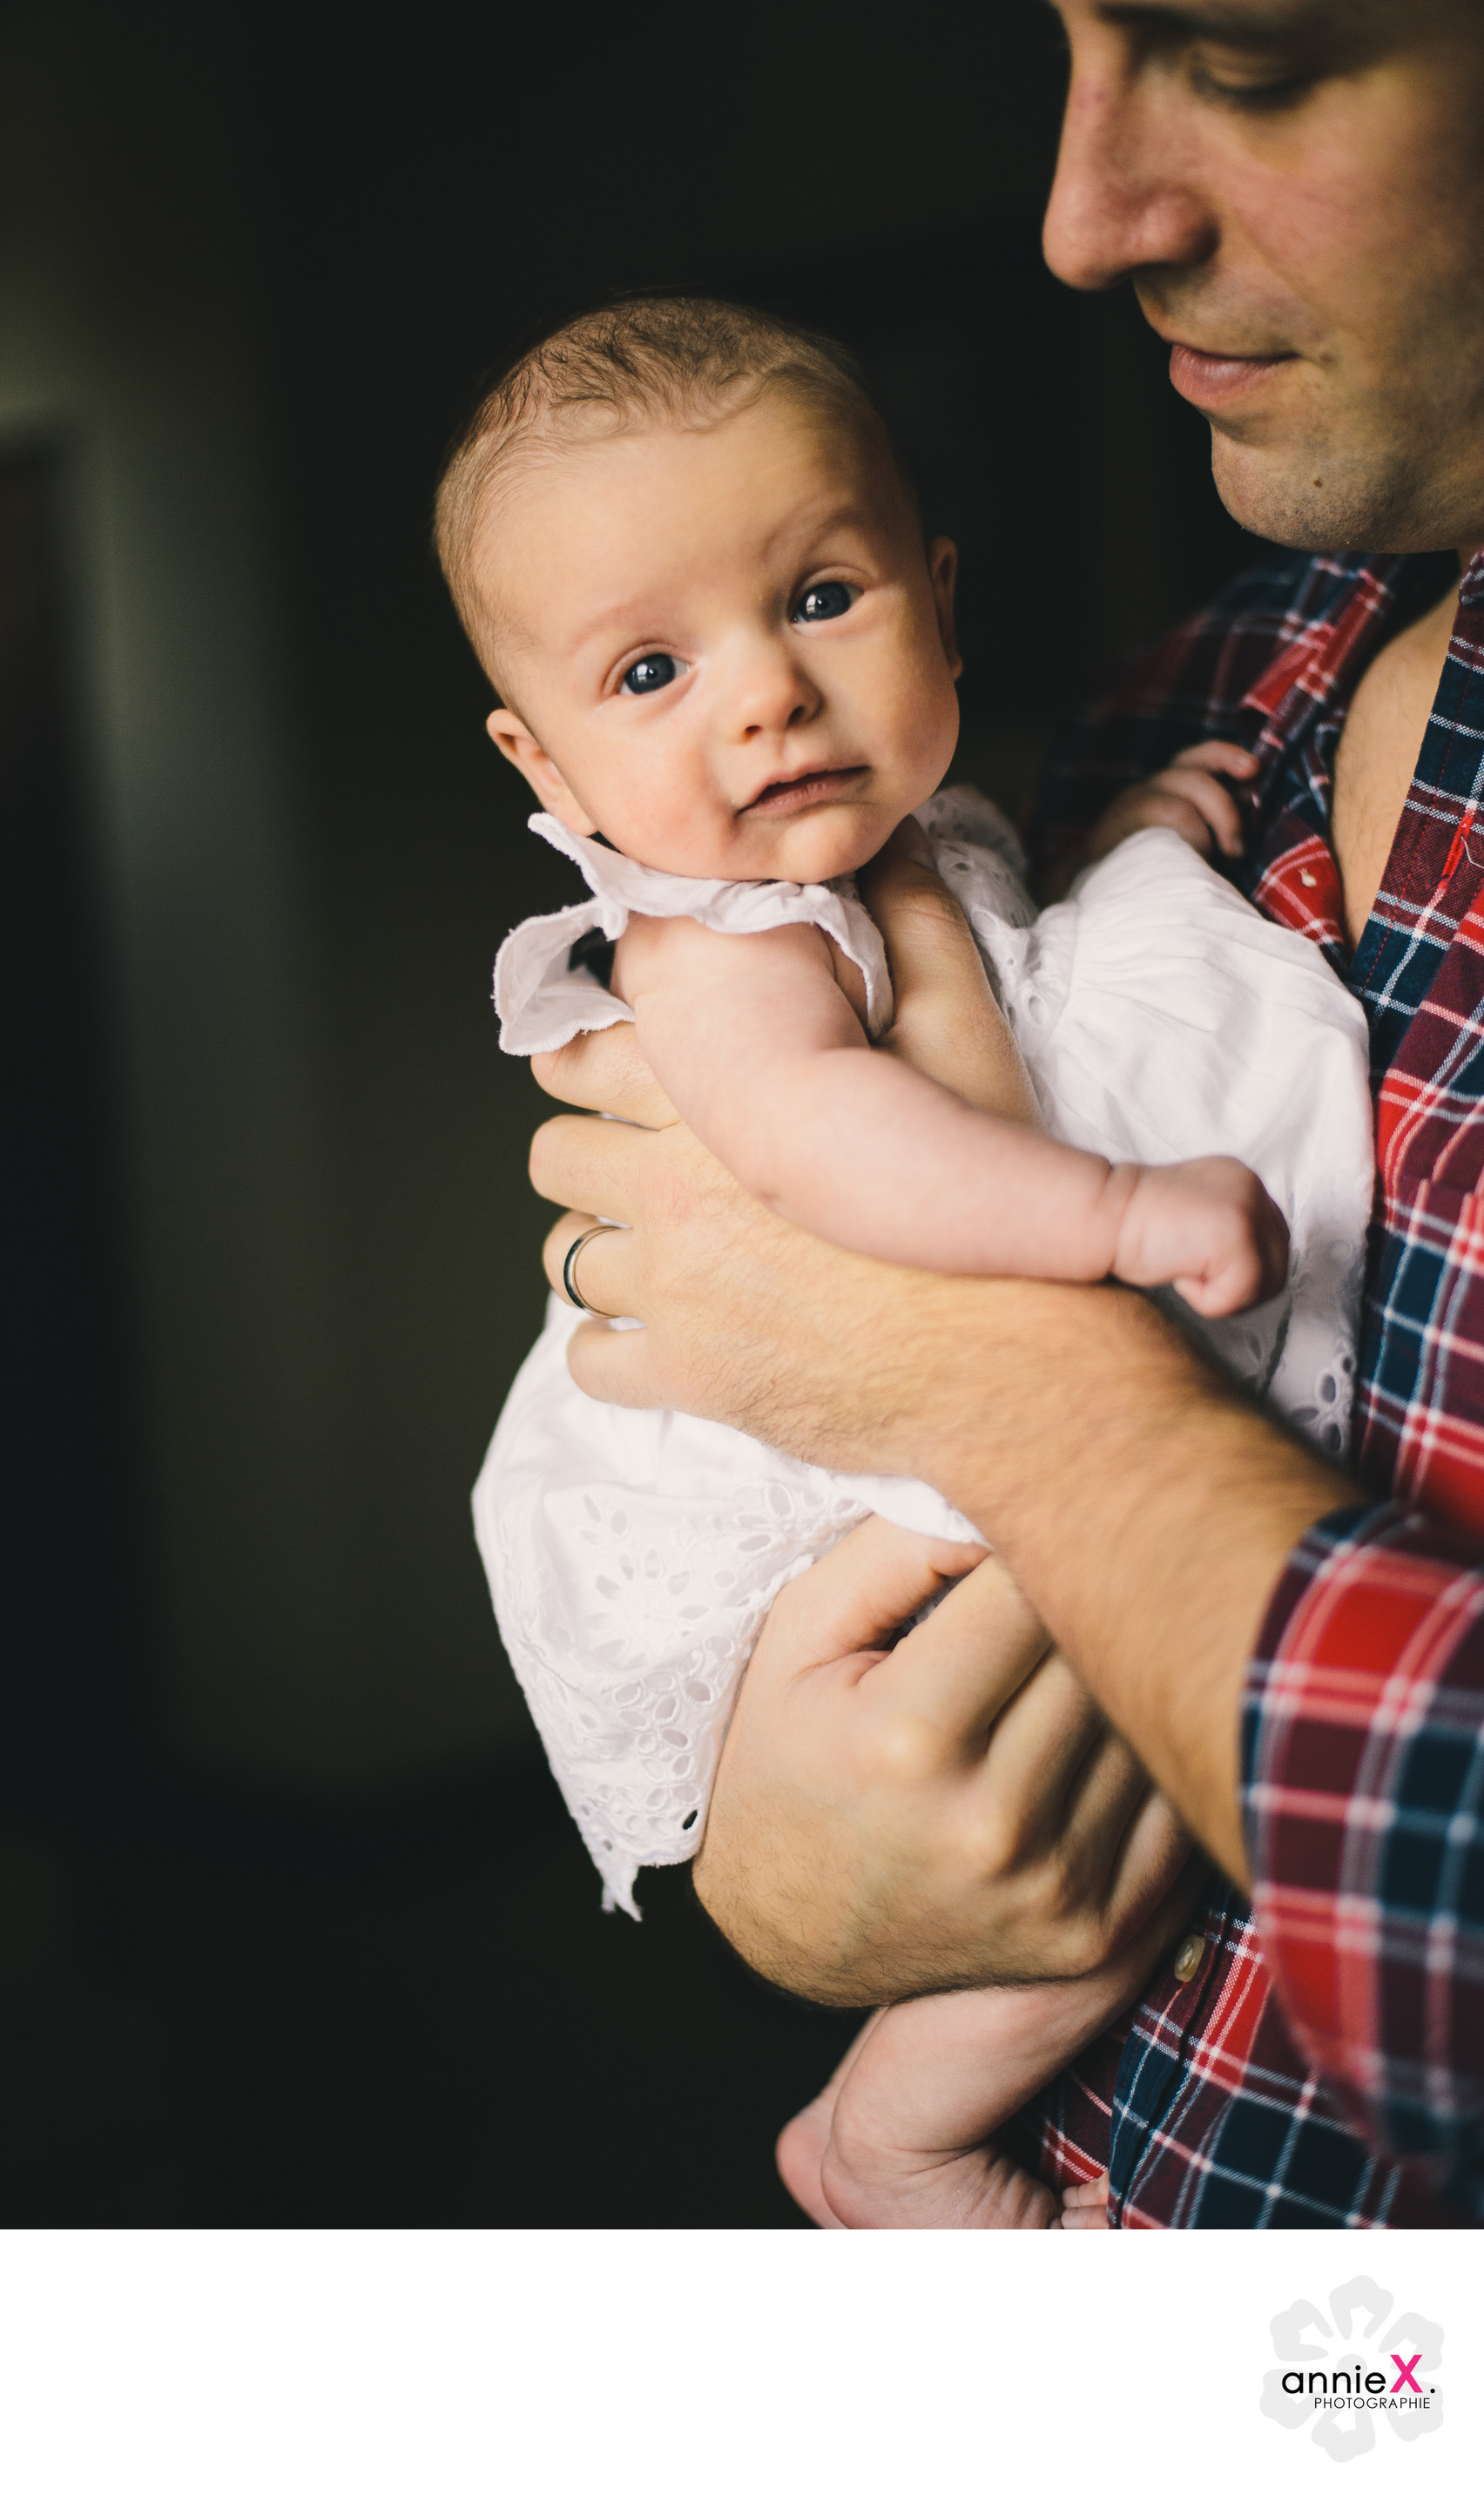 Baby girl with father - bellies and babies - annie x photography